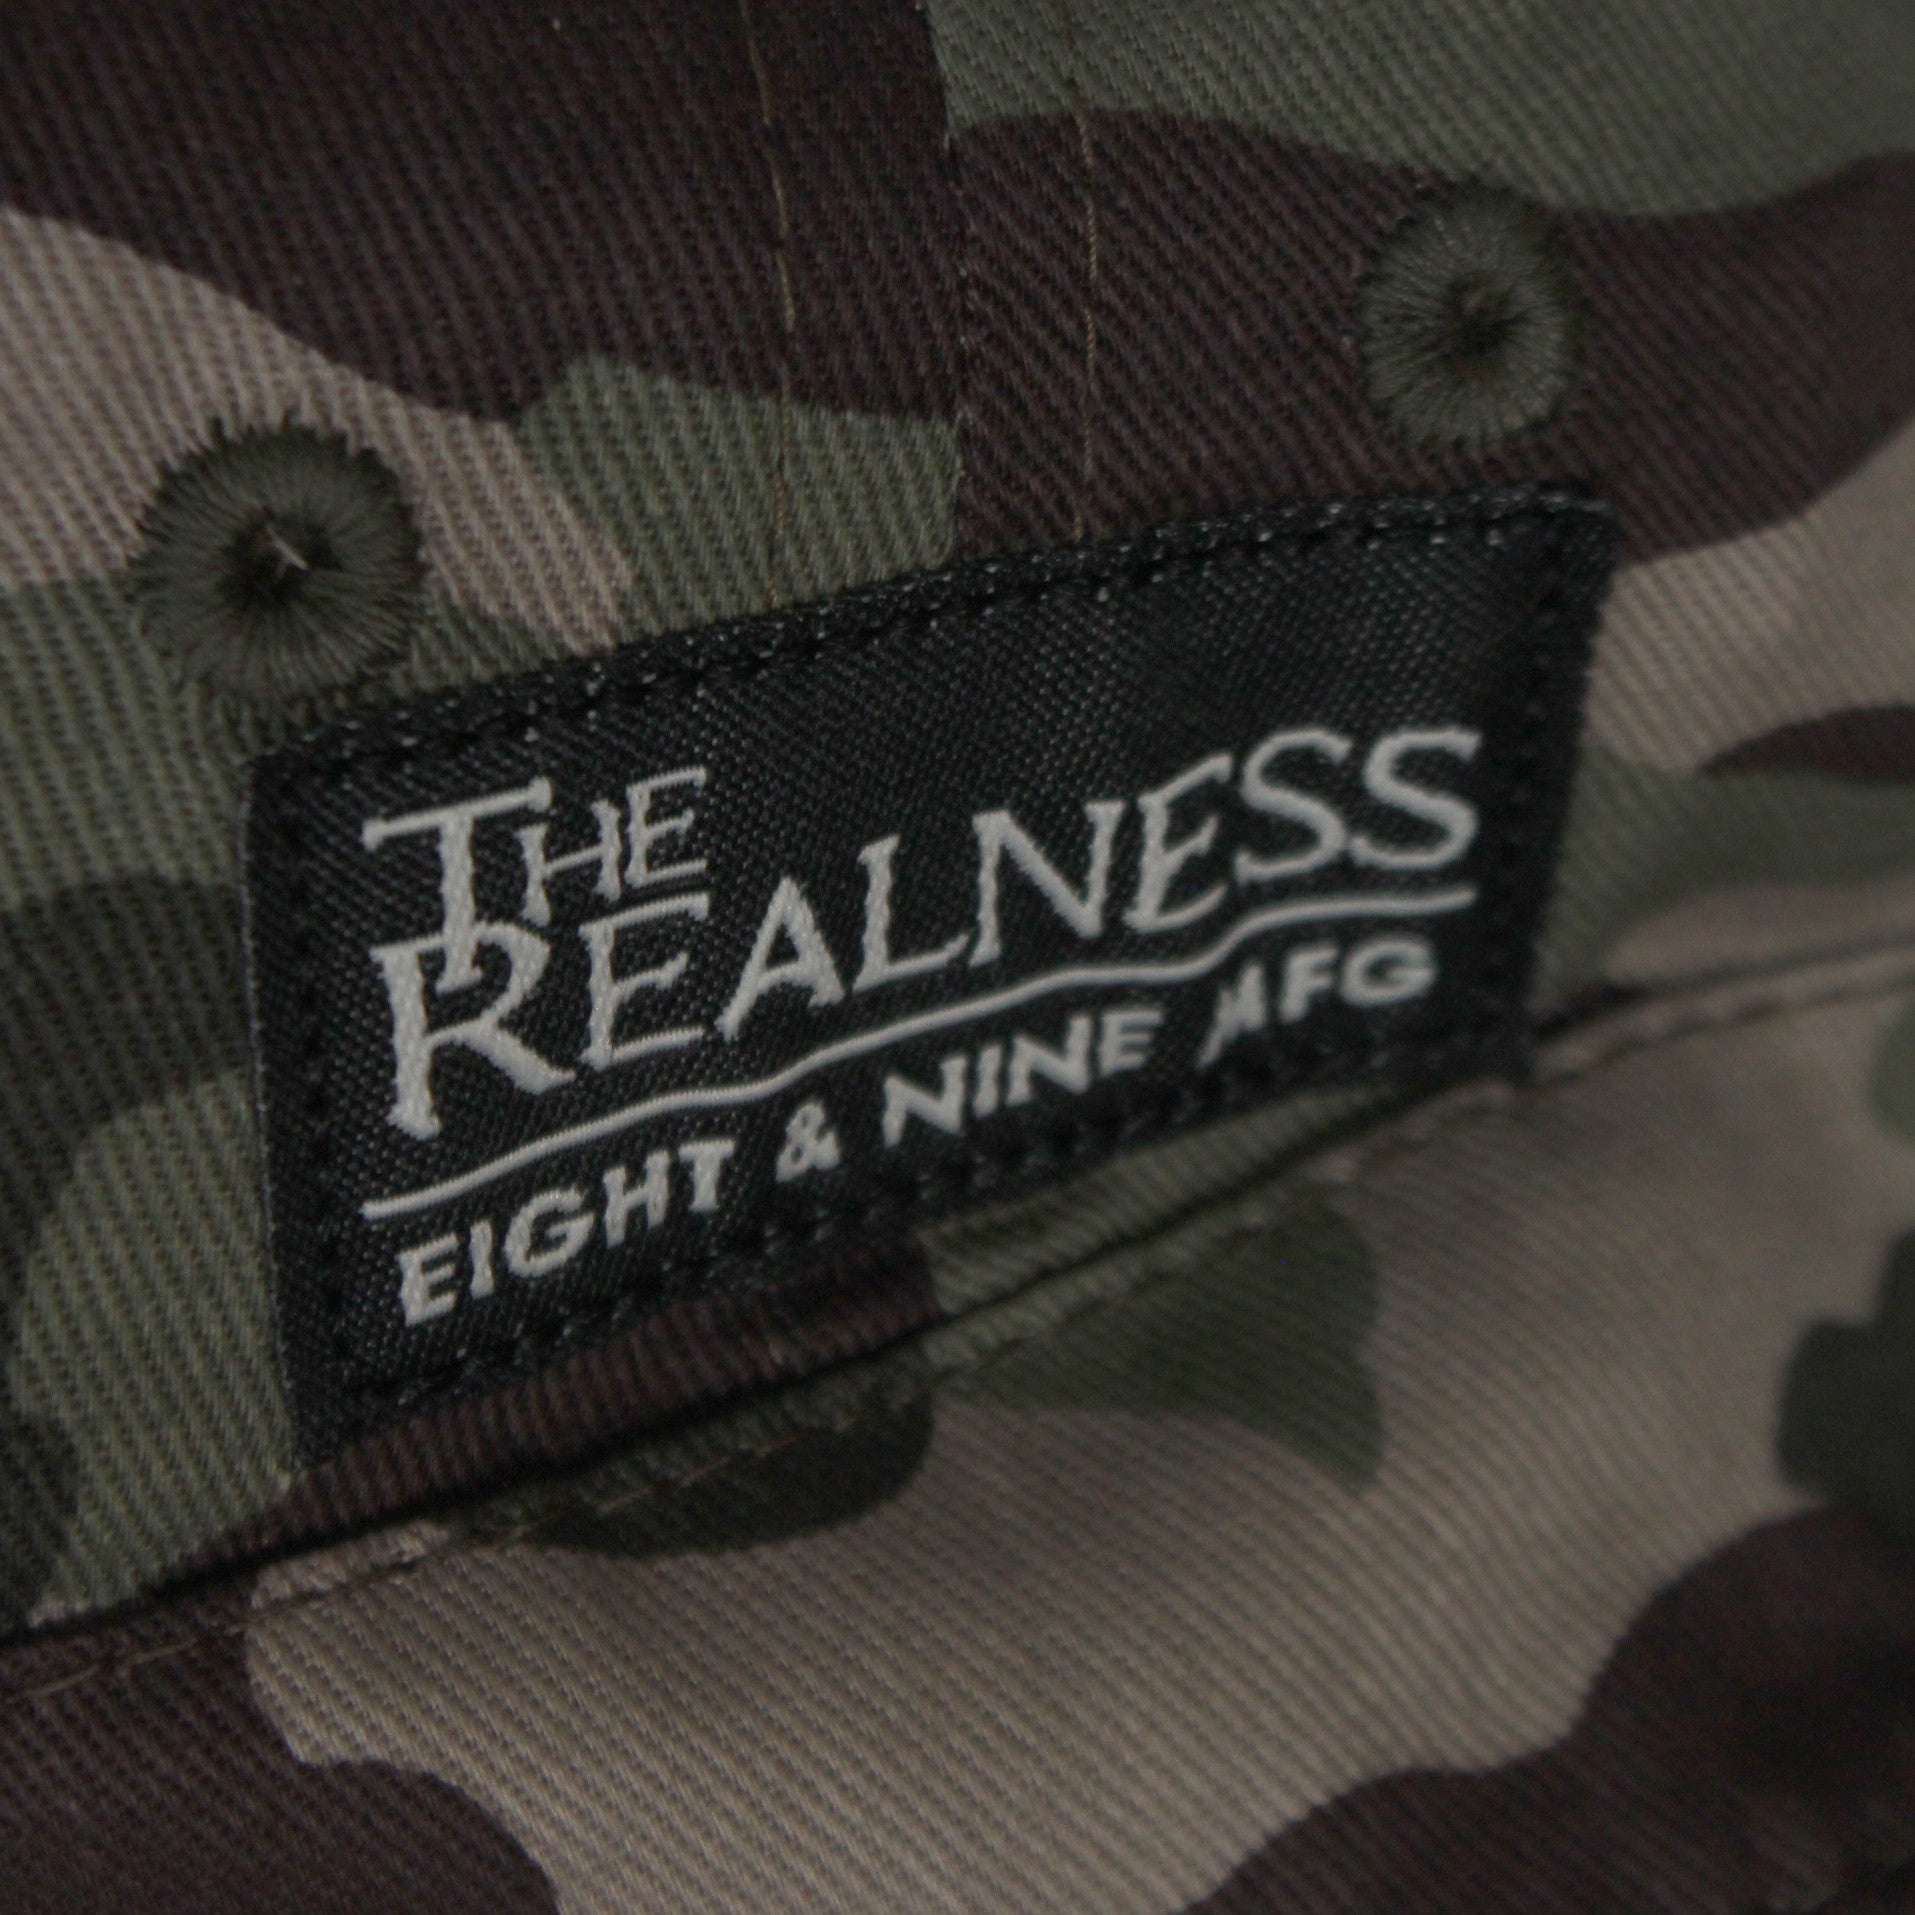 The Realness Camo Bucket Hat Signed by Cormega - 4